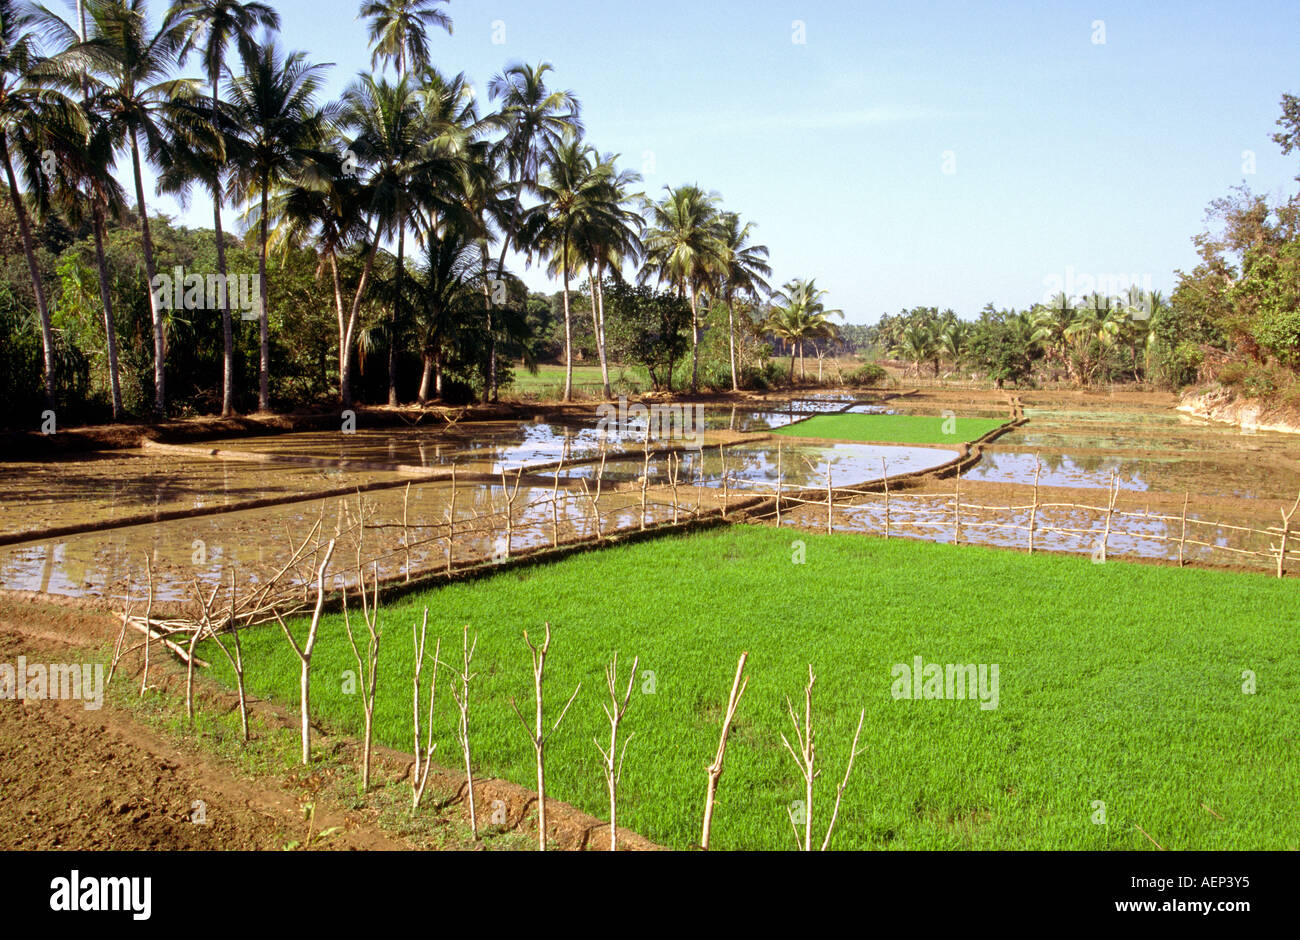 India Goa Agonda agriculture rice paddies being prepared for planting Stock Photo